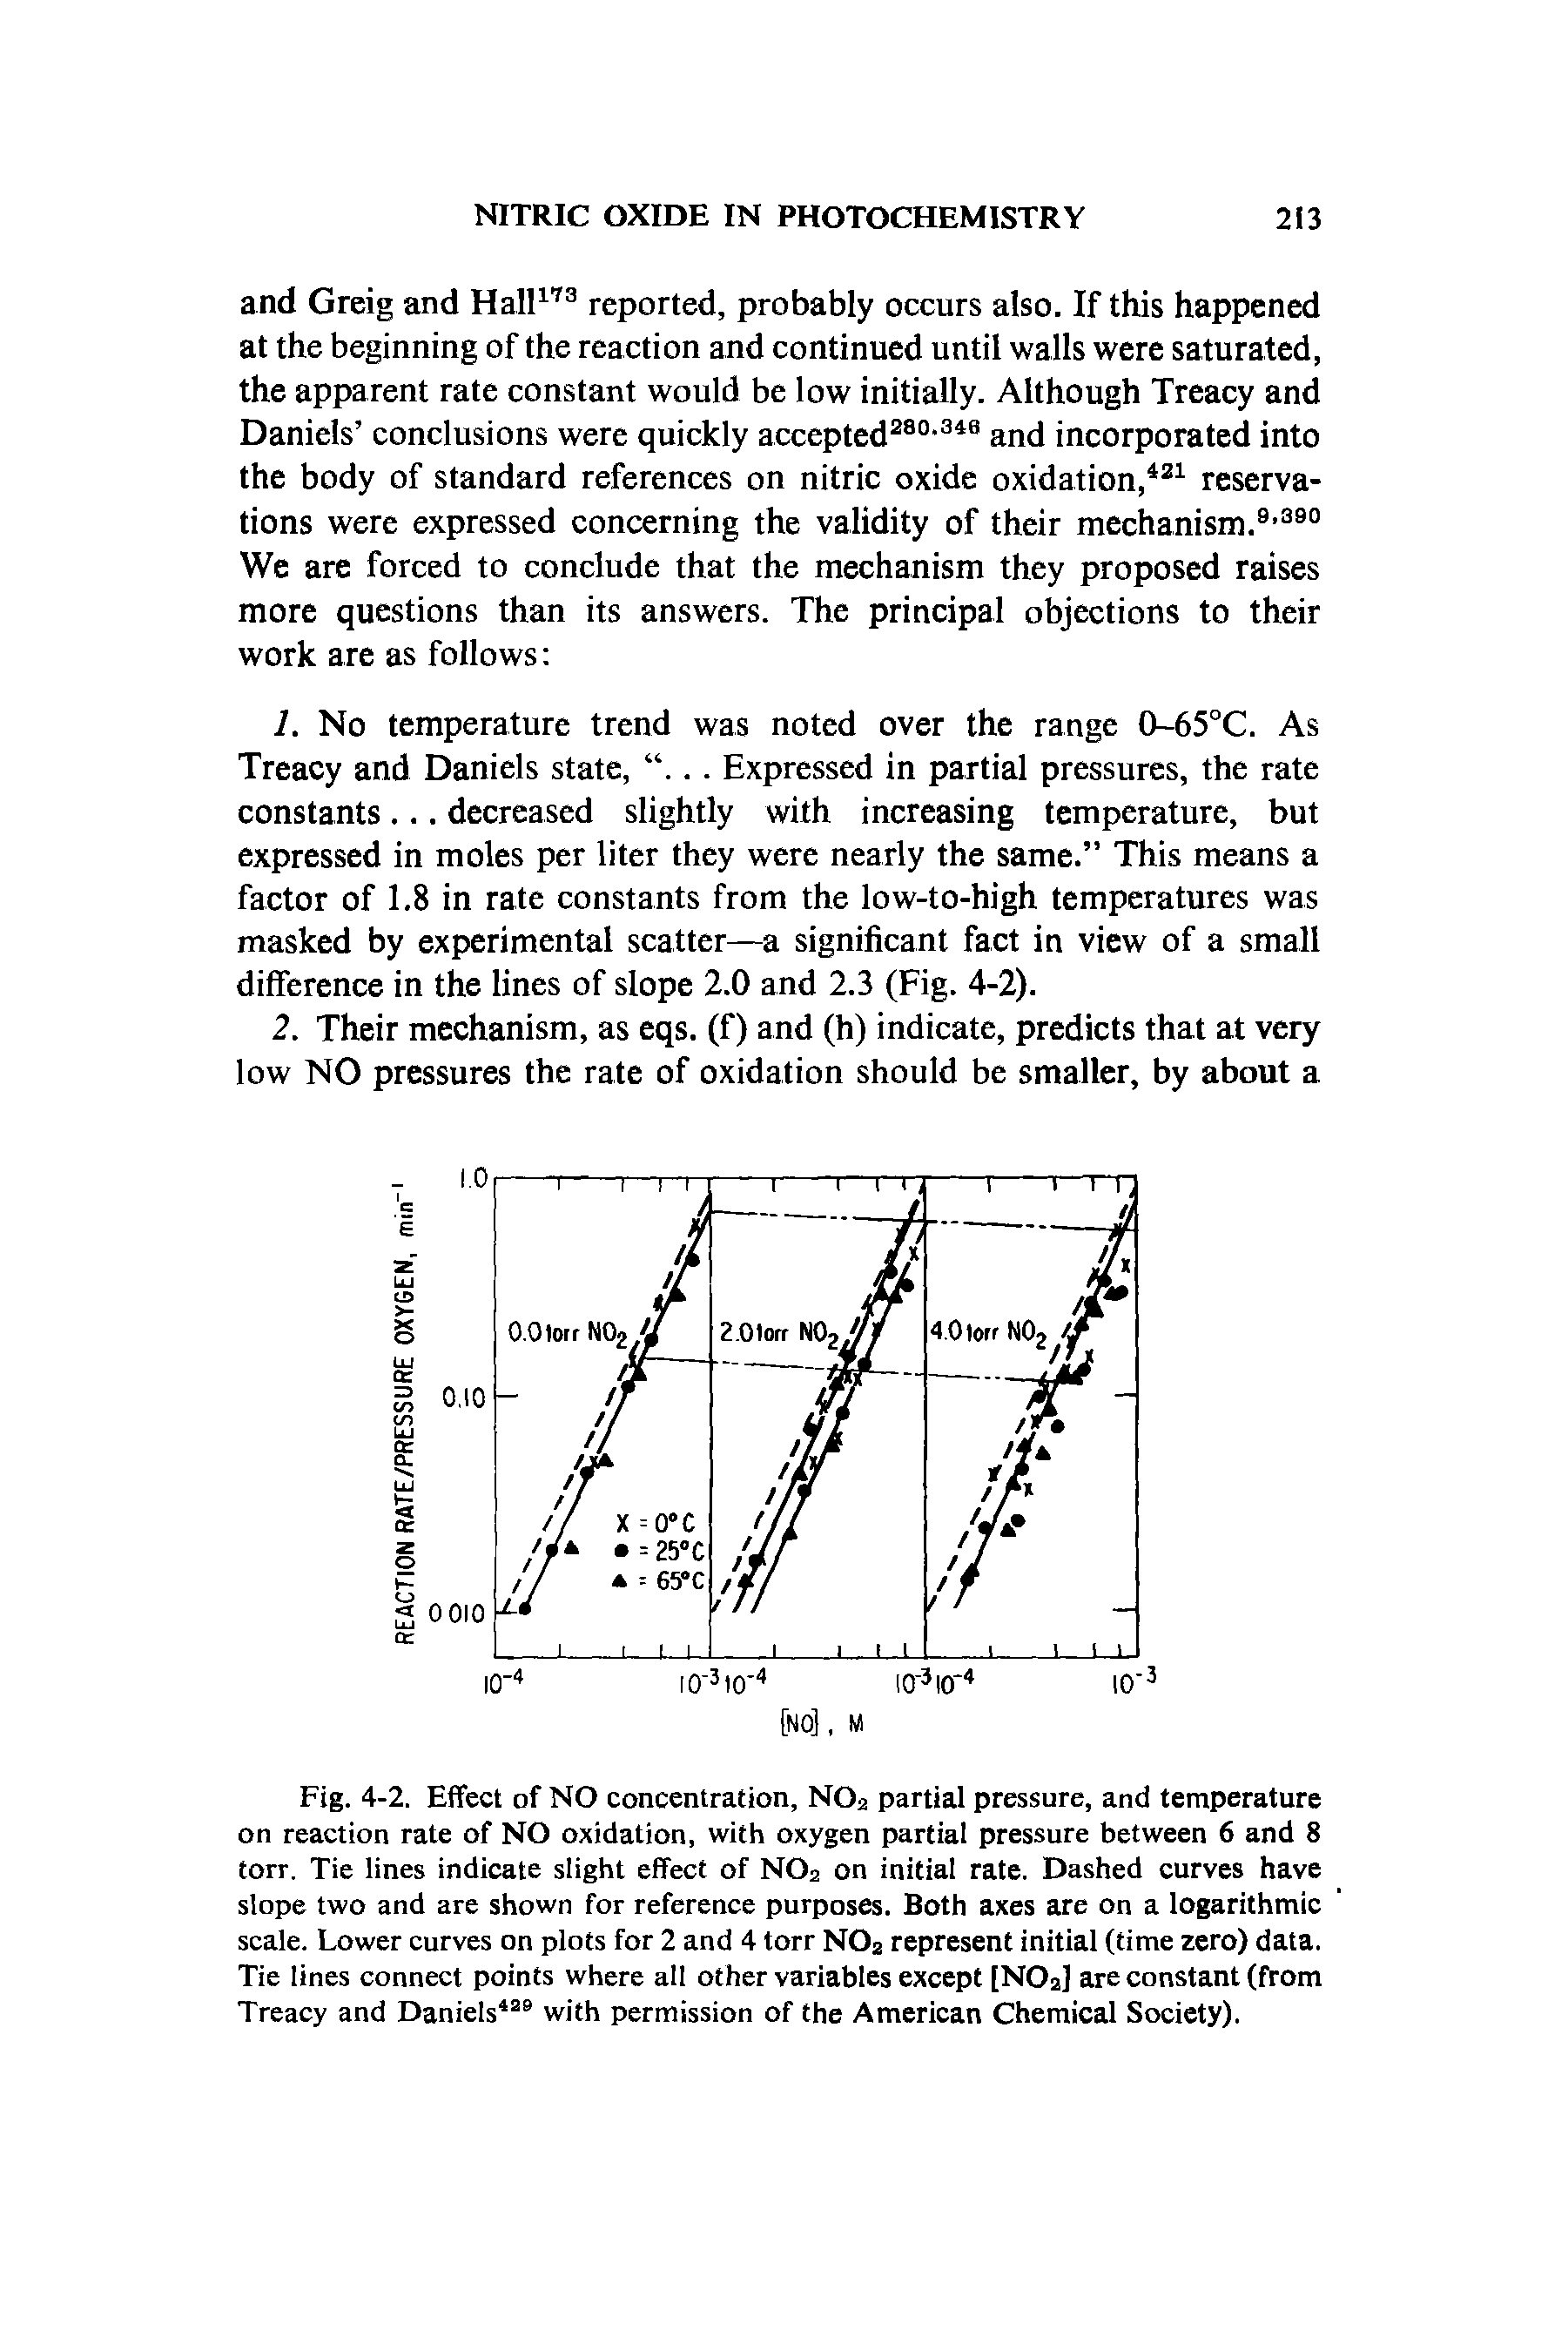 Fig. 4-2. Effect of NO concentration, N02 partial pressure, and temperature on reaction rate of NO oxidation, with oxygen partial pressure between 6 and 8 torr. Tie lines indicate slight effect of N02 on initial rate. Dashed curves have slope two and are shown for reference purposes. Both axes are on a logarithmic scale. Lower curves on plots for 2 and 4 torr N02 represent initial (time zero) data. Tie lines connect points where all other variables except [NOa] are constant (from Treacy and Daniels429 with permission of the American Chemical Society).